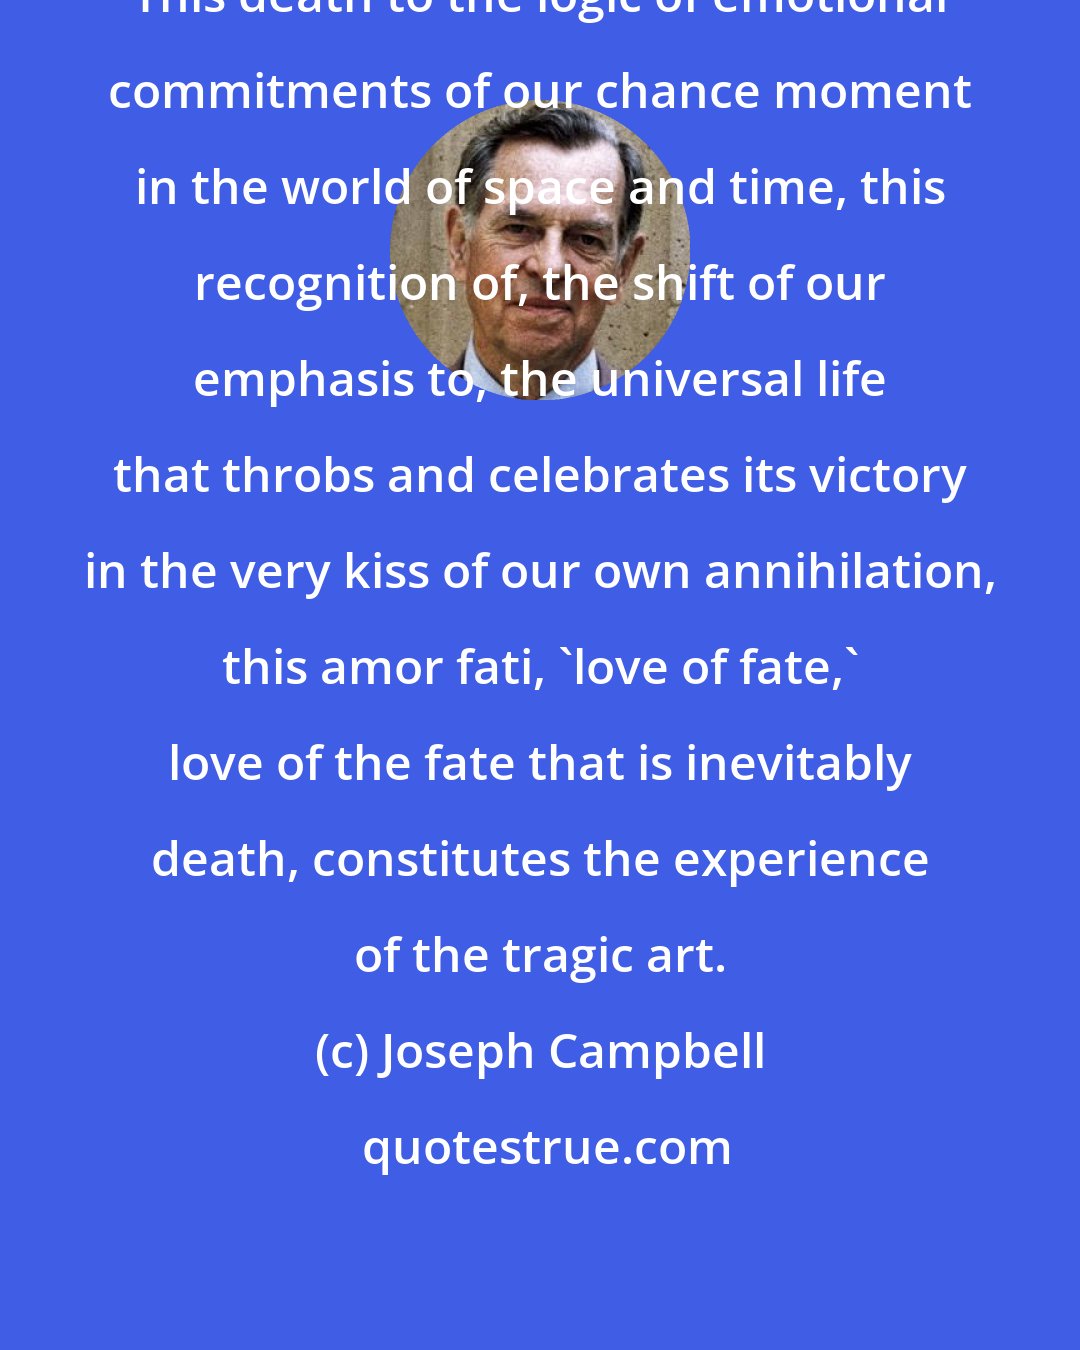 Joseph Campbell: This death to the logic of emotional commitments of our chance moment in the world of space and time, this recognition of, the shift of our emphasis to, the universal life that throbs and celebrates its victory in the very kiss of our own annihilation, this amor fati, 'love of fate,' love of the fate that is inevitably death, constitutes the experience of the tragic art.